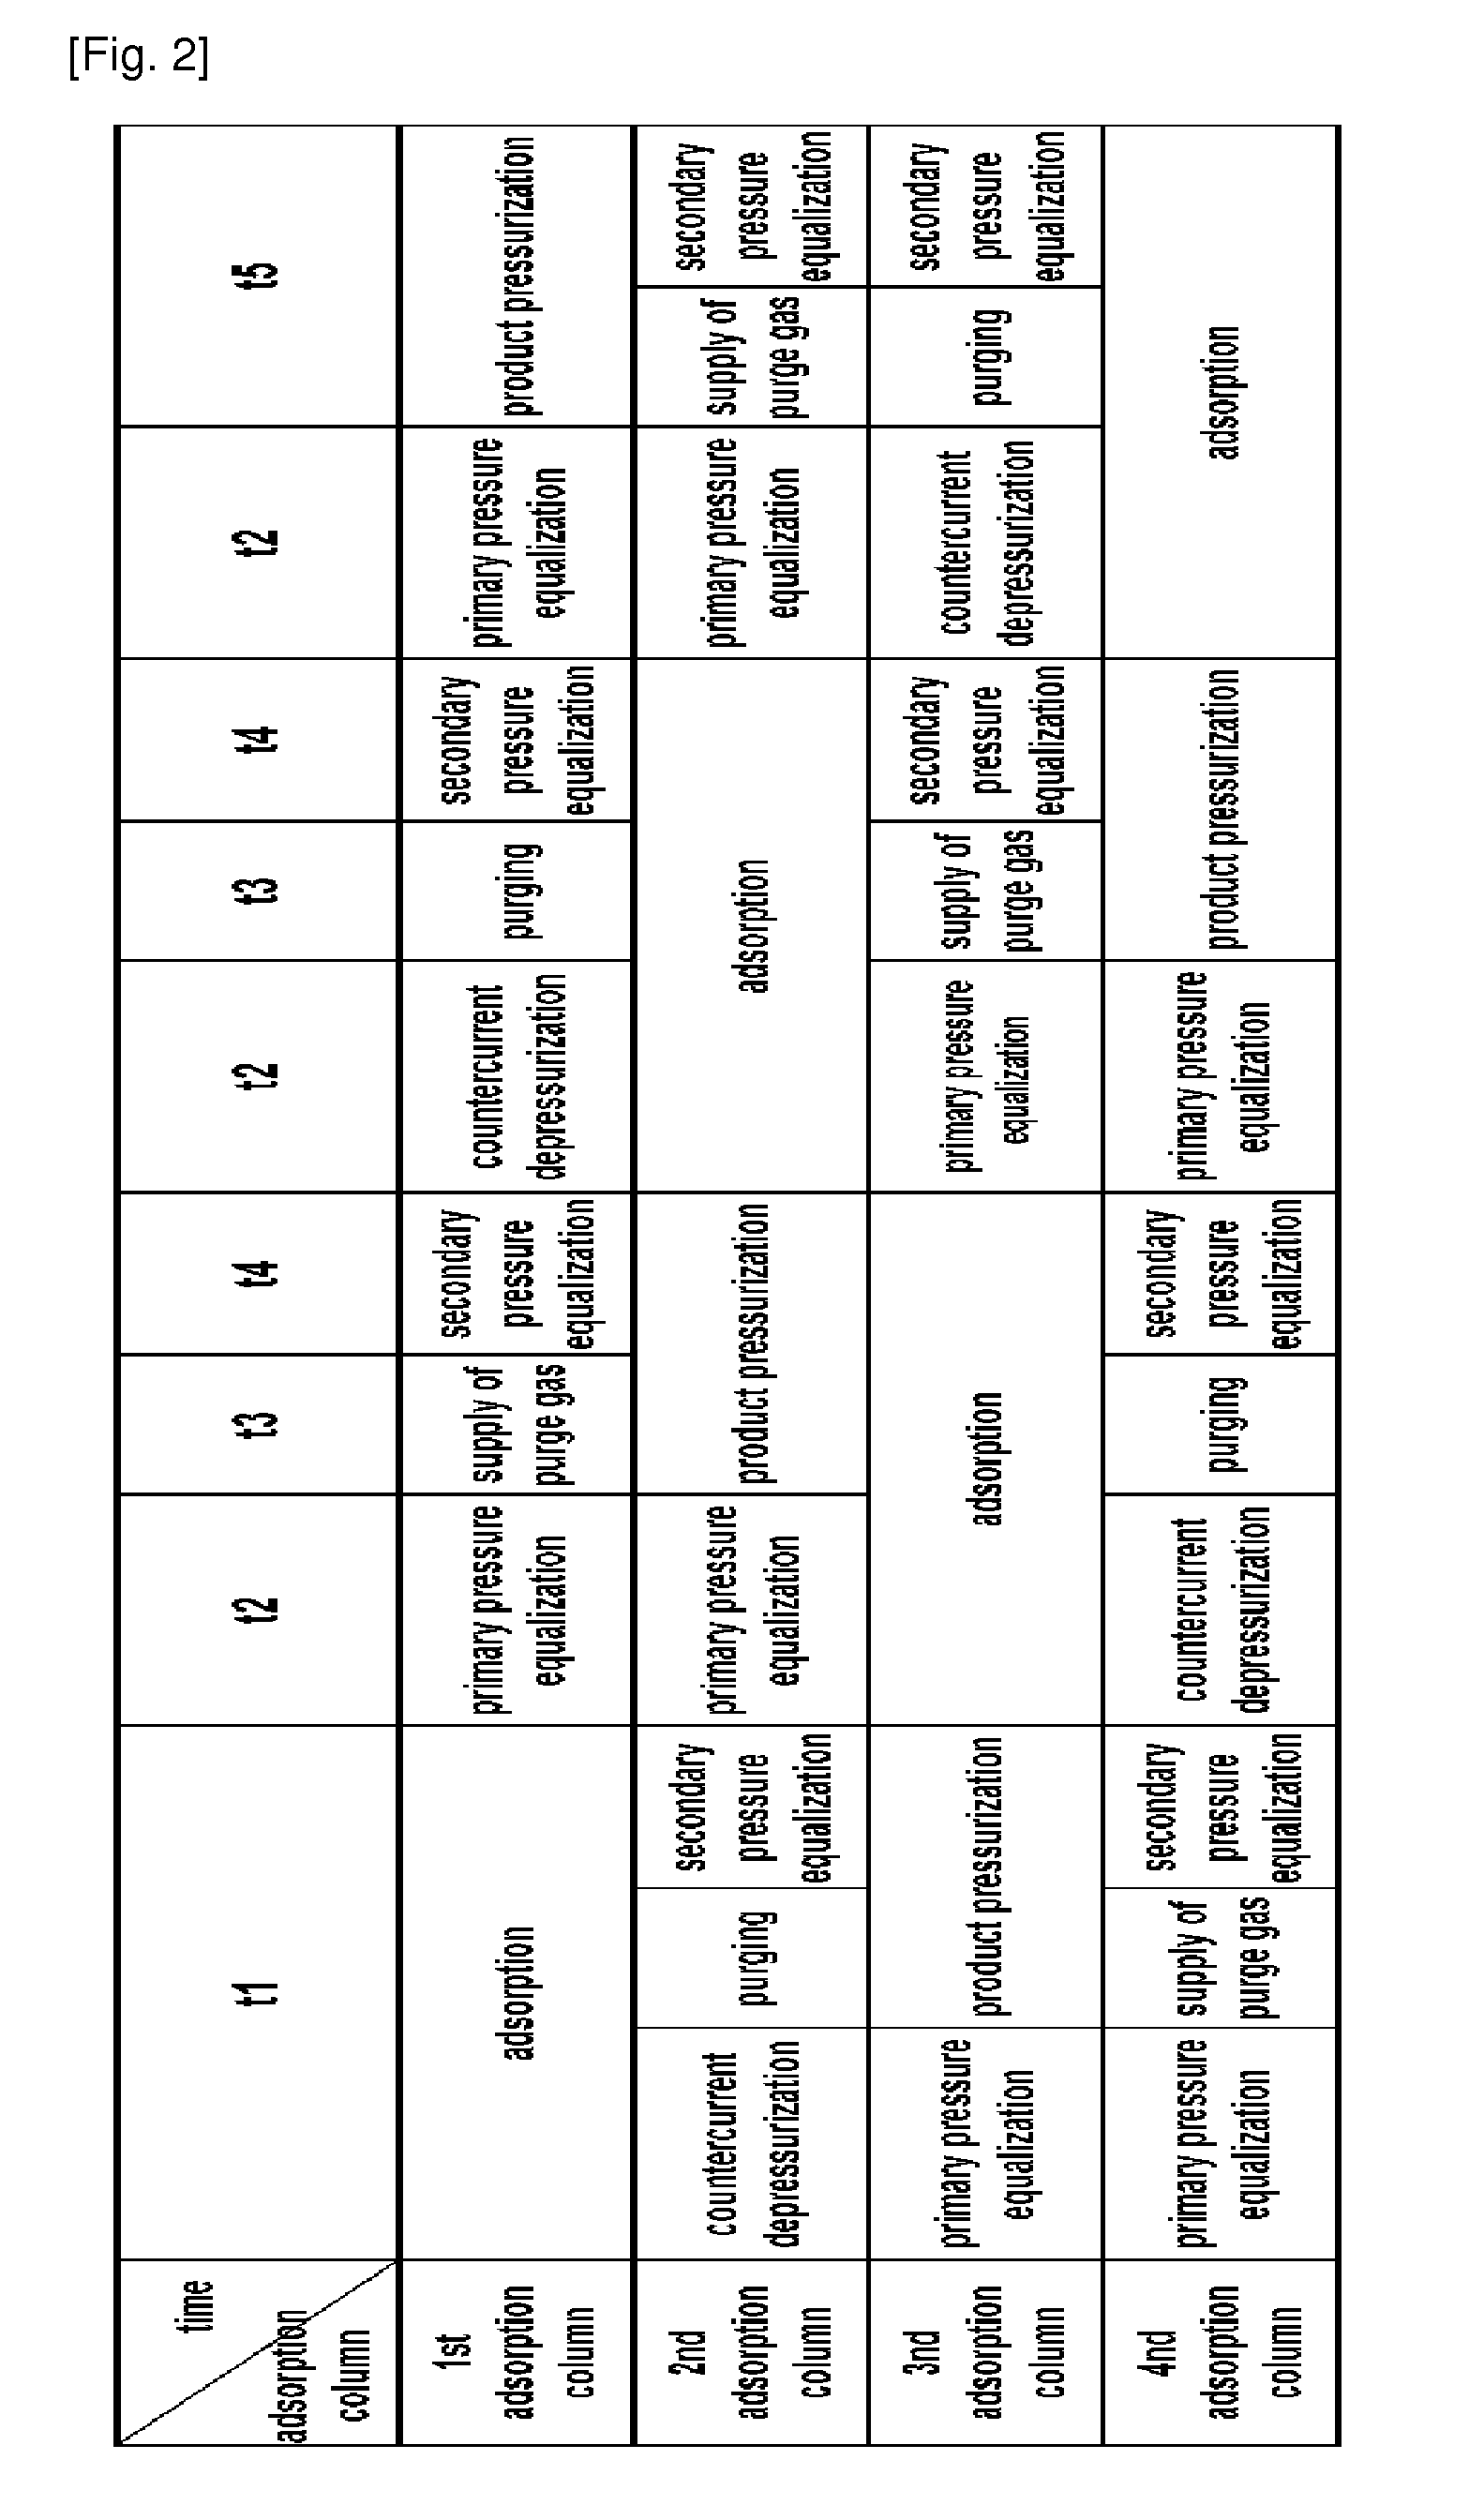 Pressure swing adsorption apparatus and method for hydrogen purification using the same